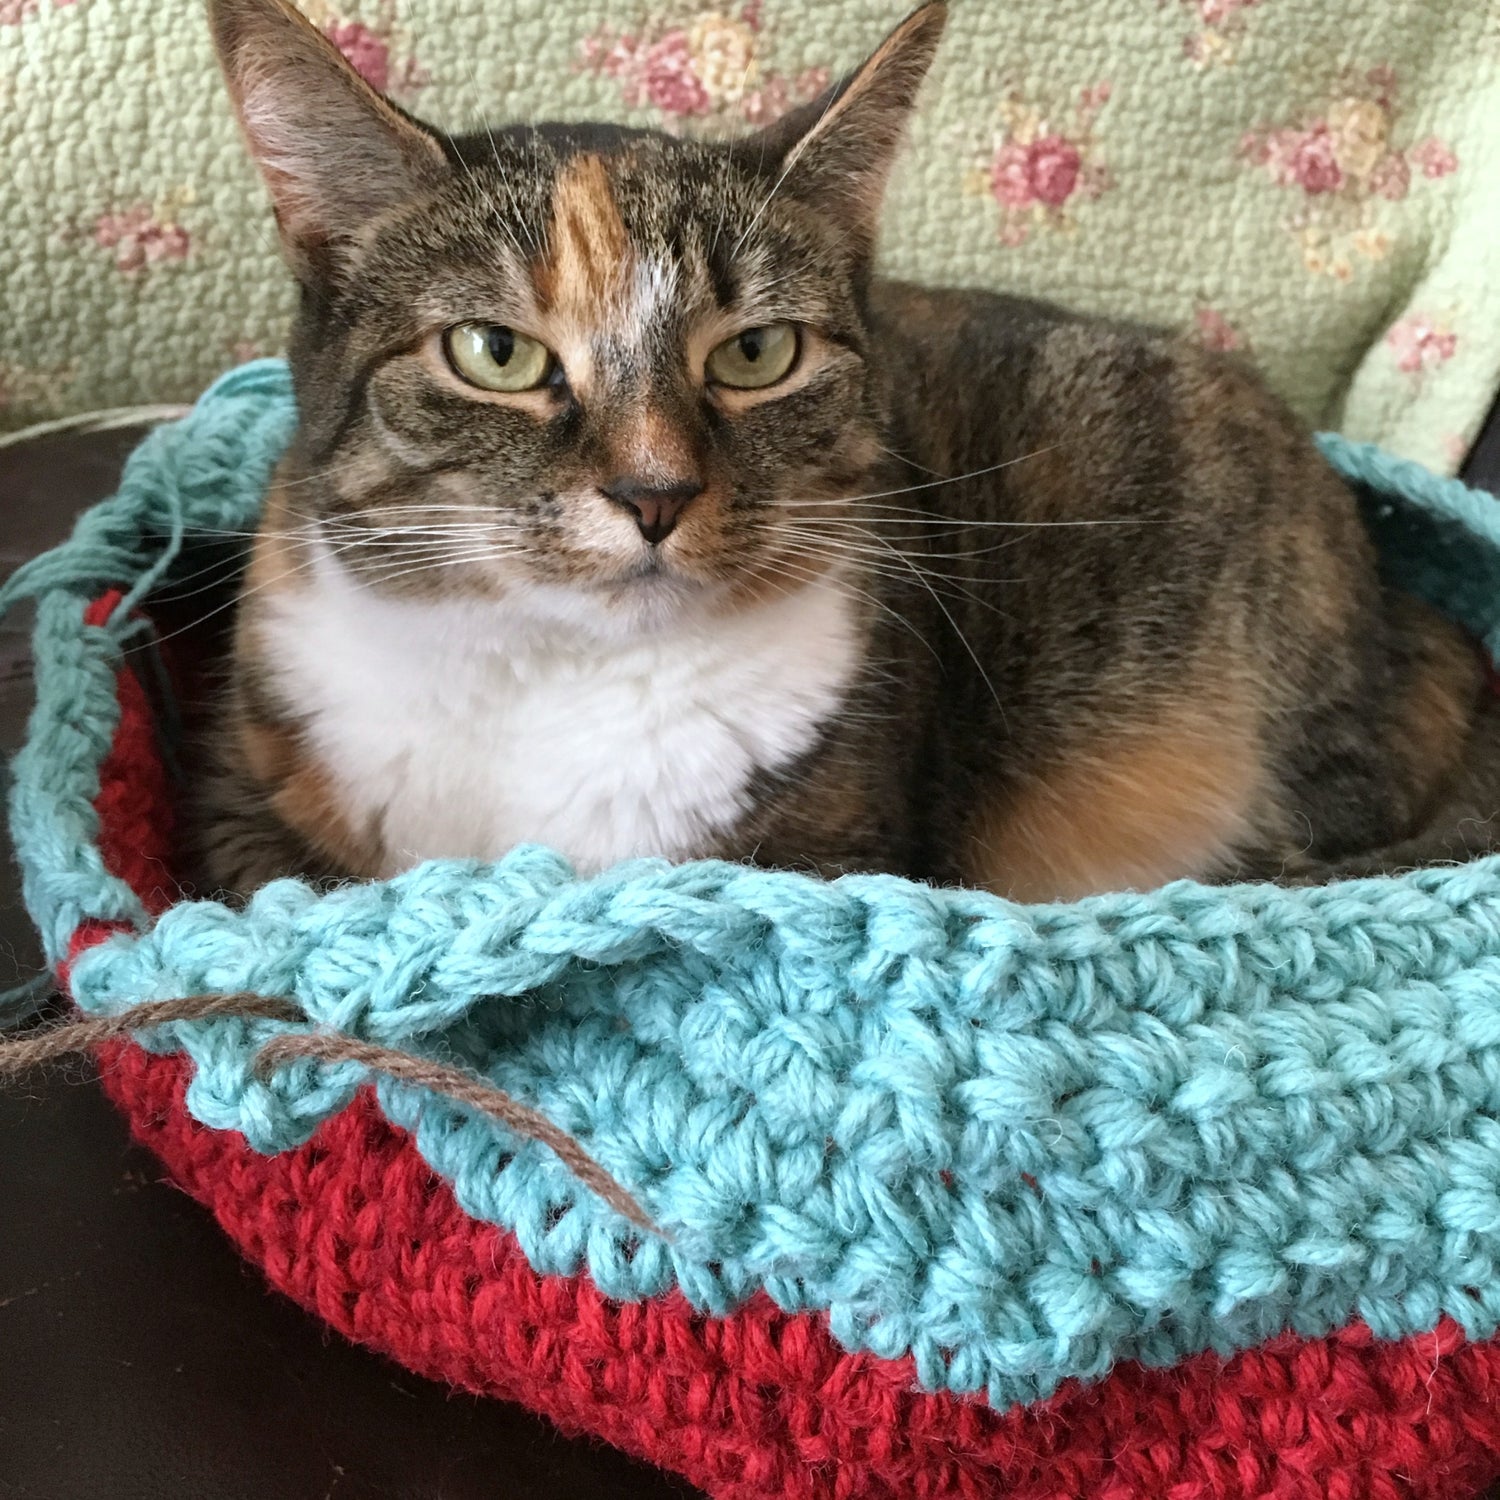 Calico Tabby Cat sitting in a non finished teal and red crocheted bowl shape